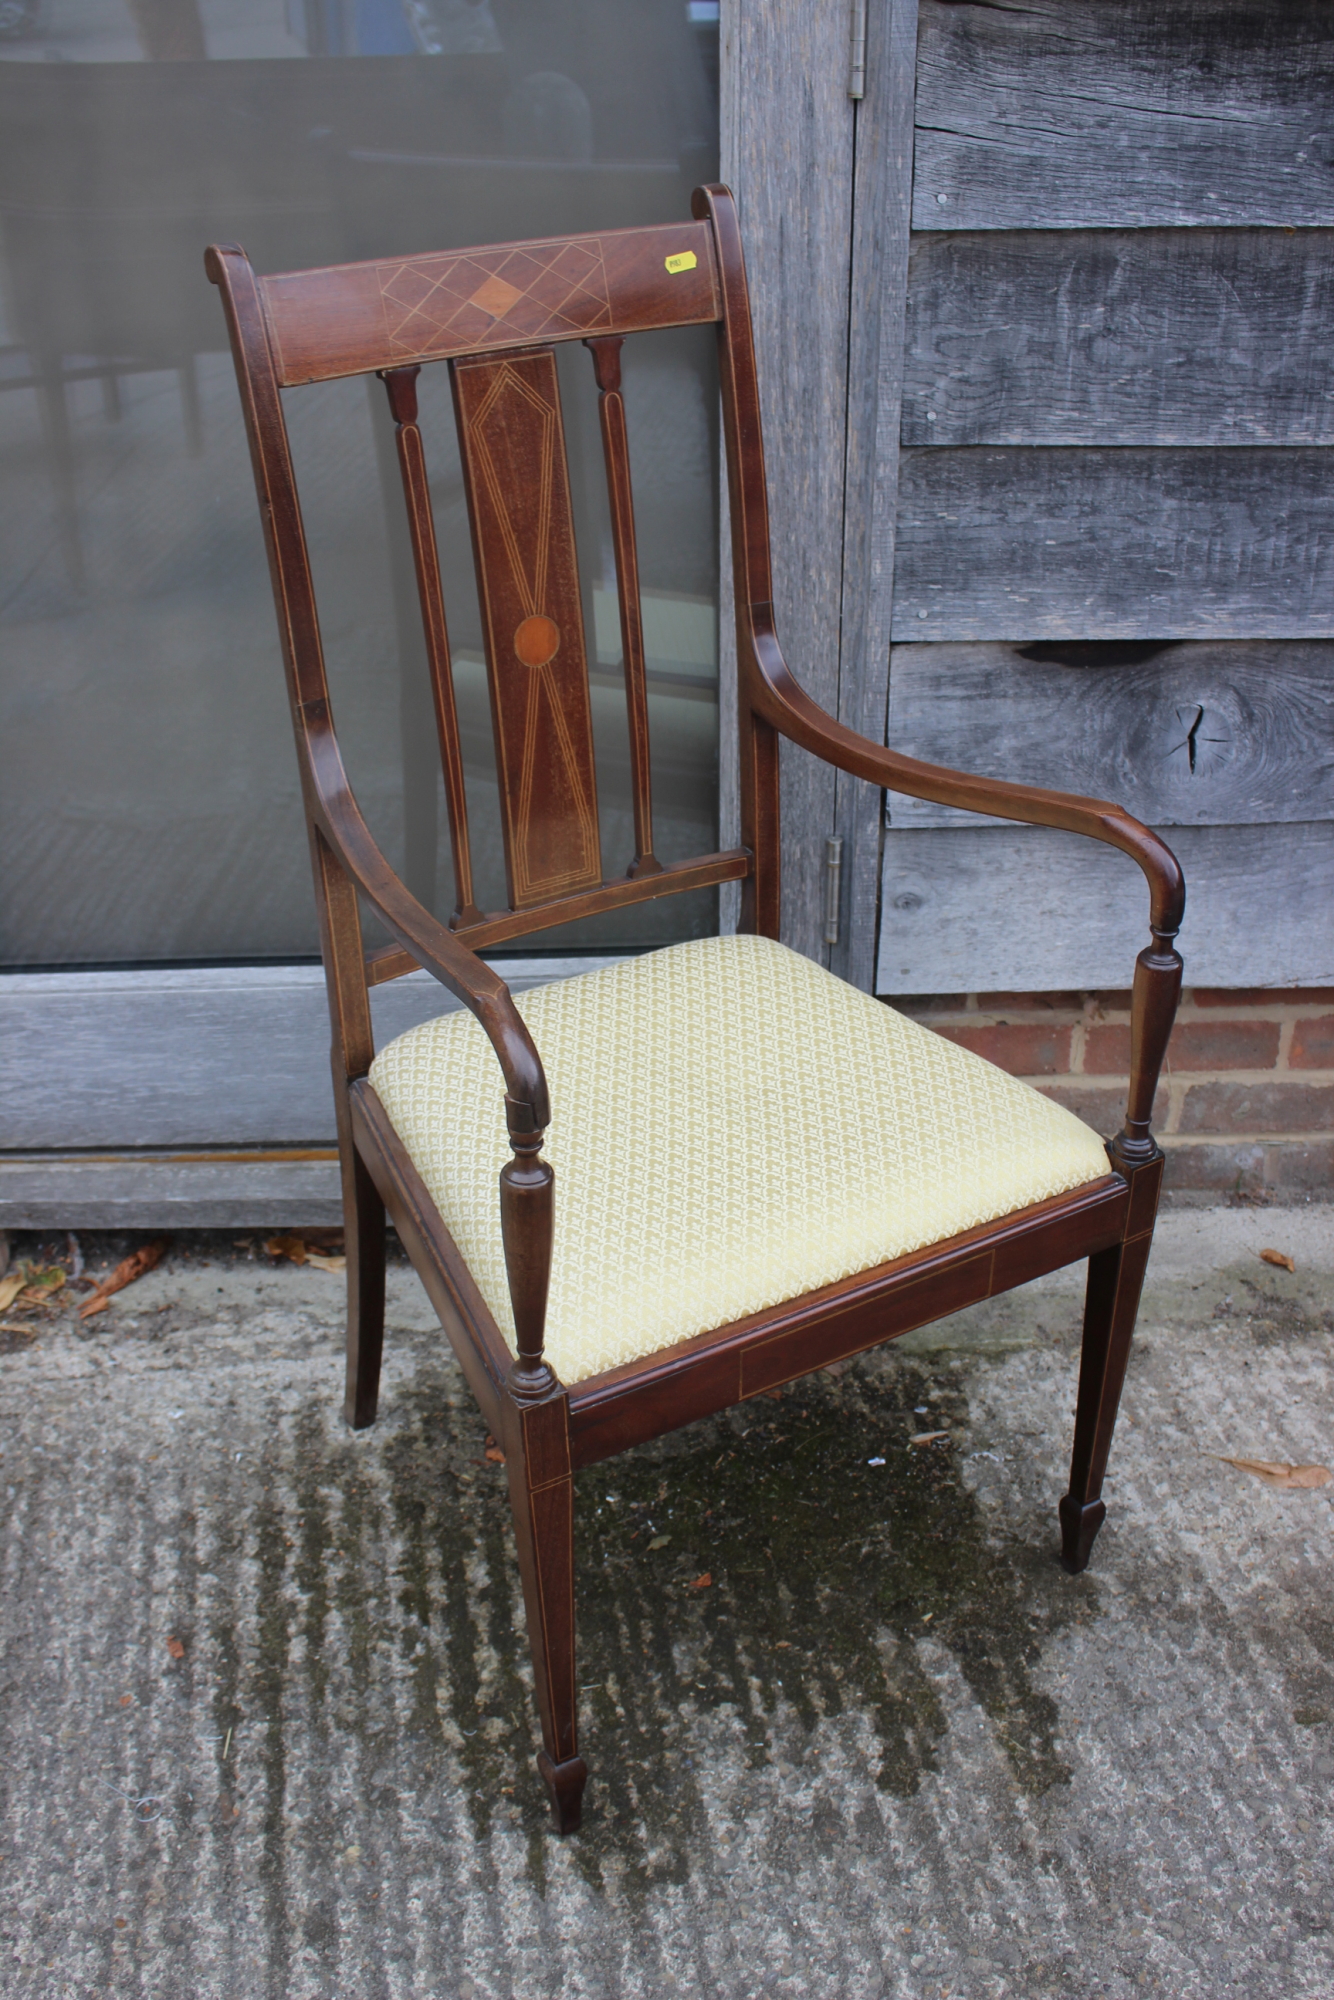 An Edwardian line inlaid mahogany open armchair with drop-in seat, upholstered in a gold fabric